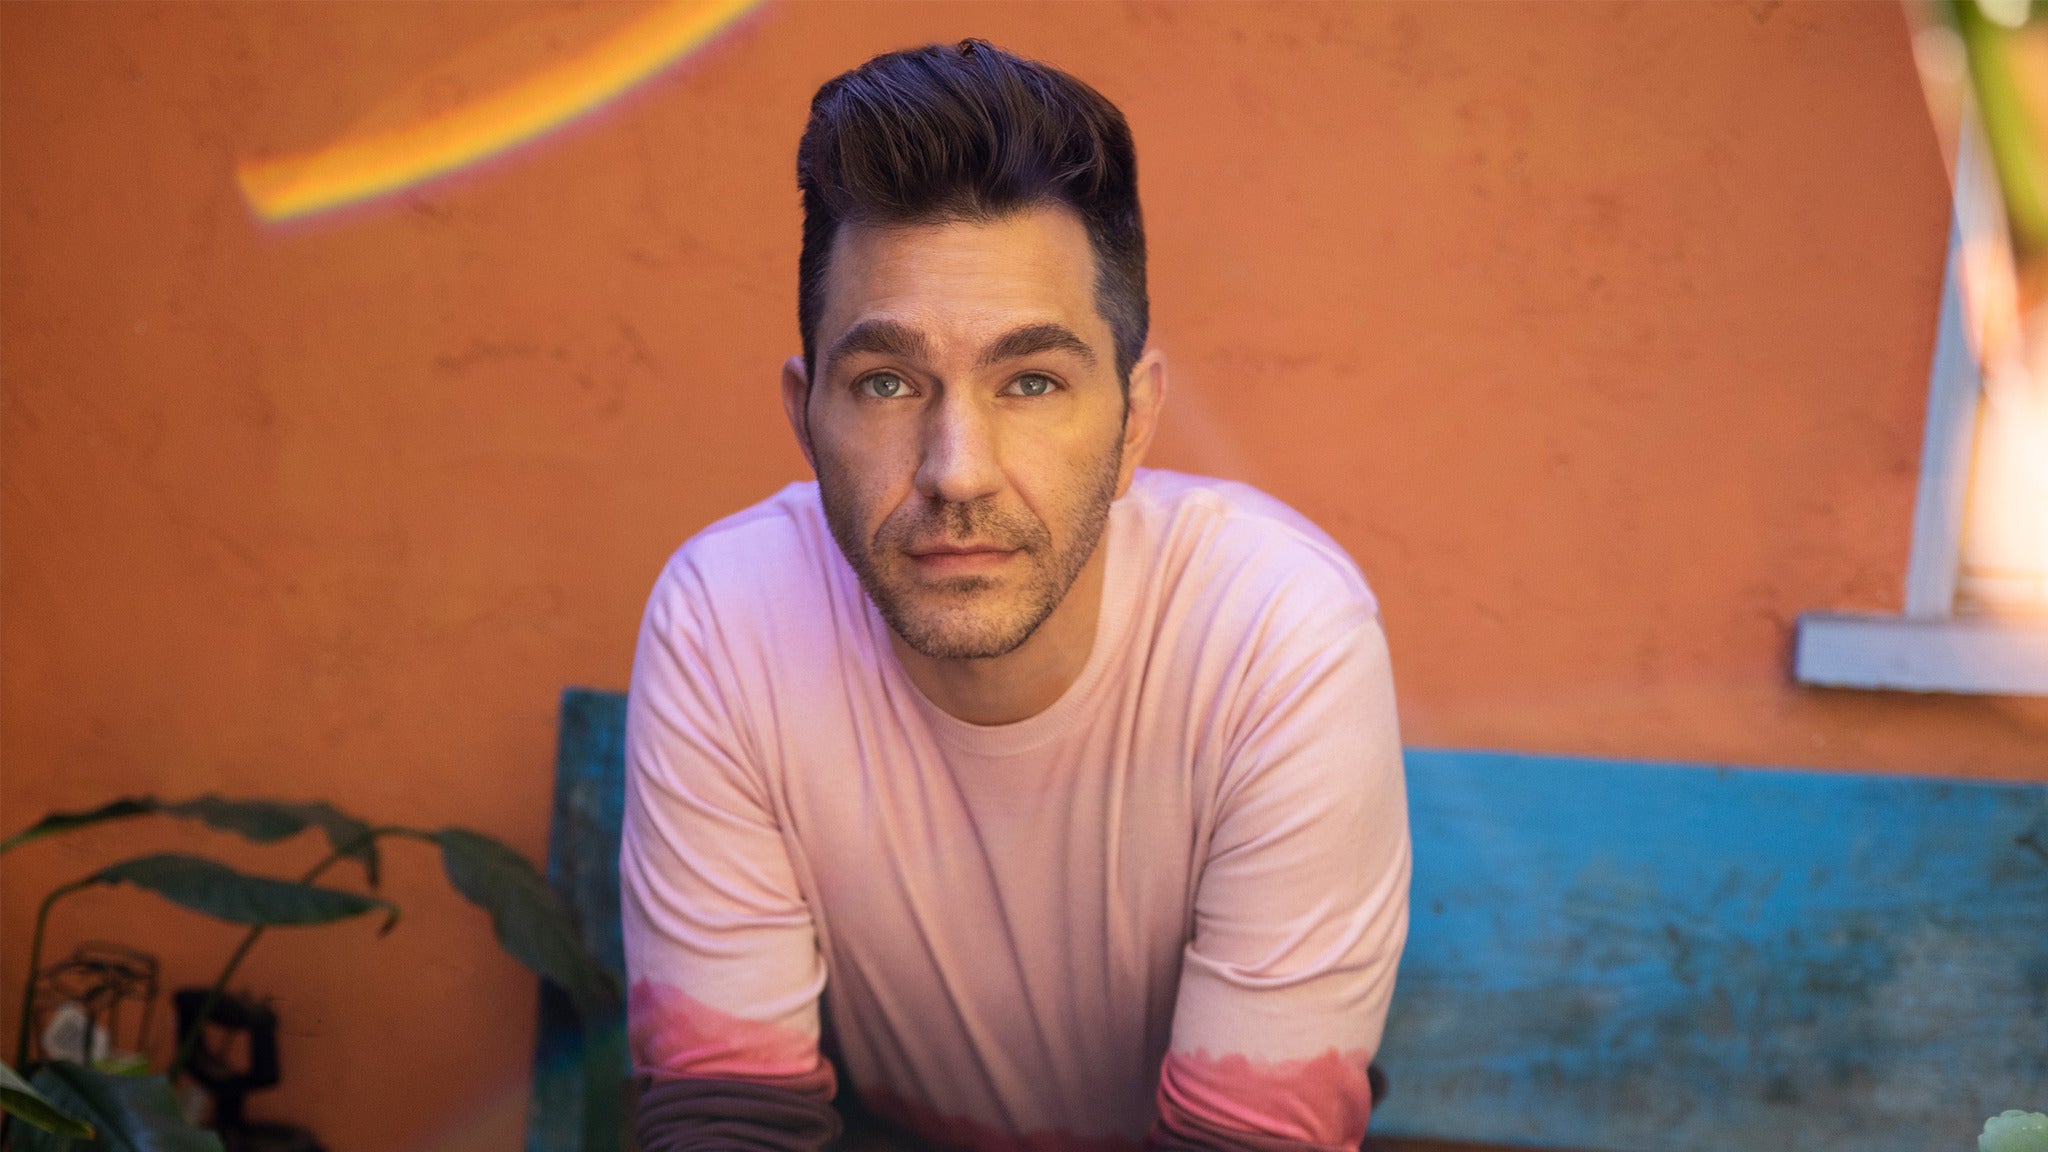 Andy Grammer at Paramount Theatre-Austin